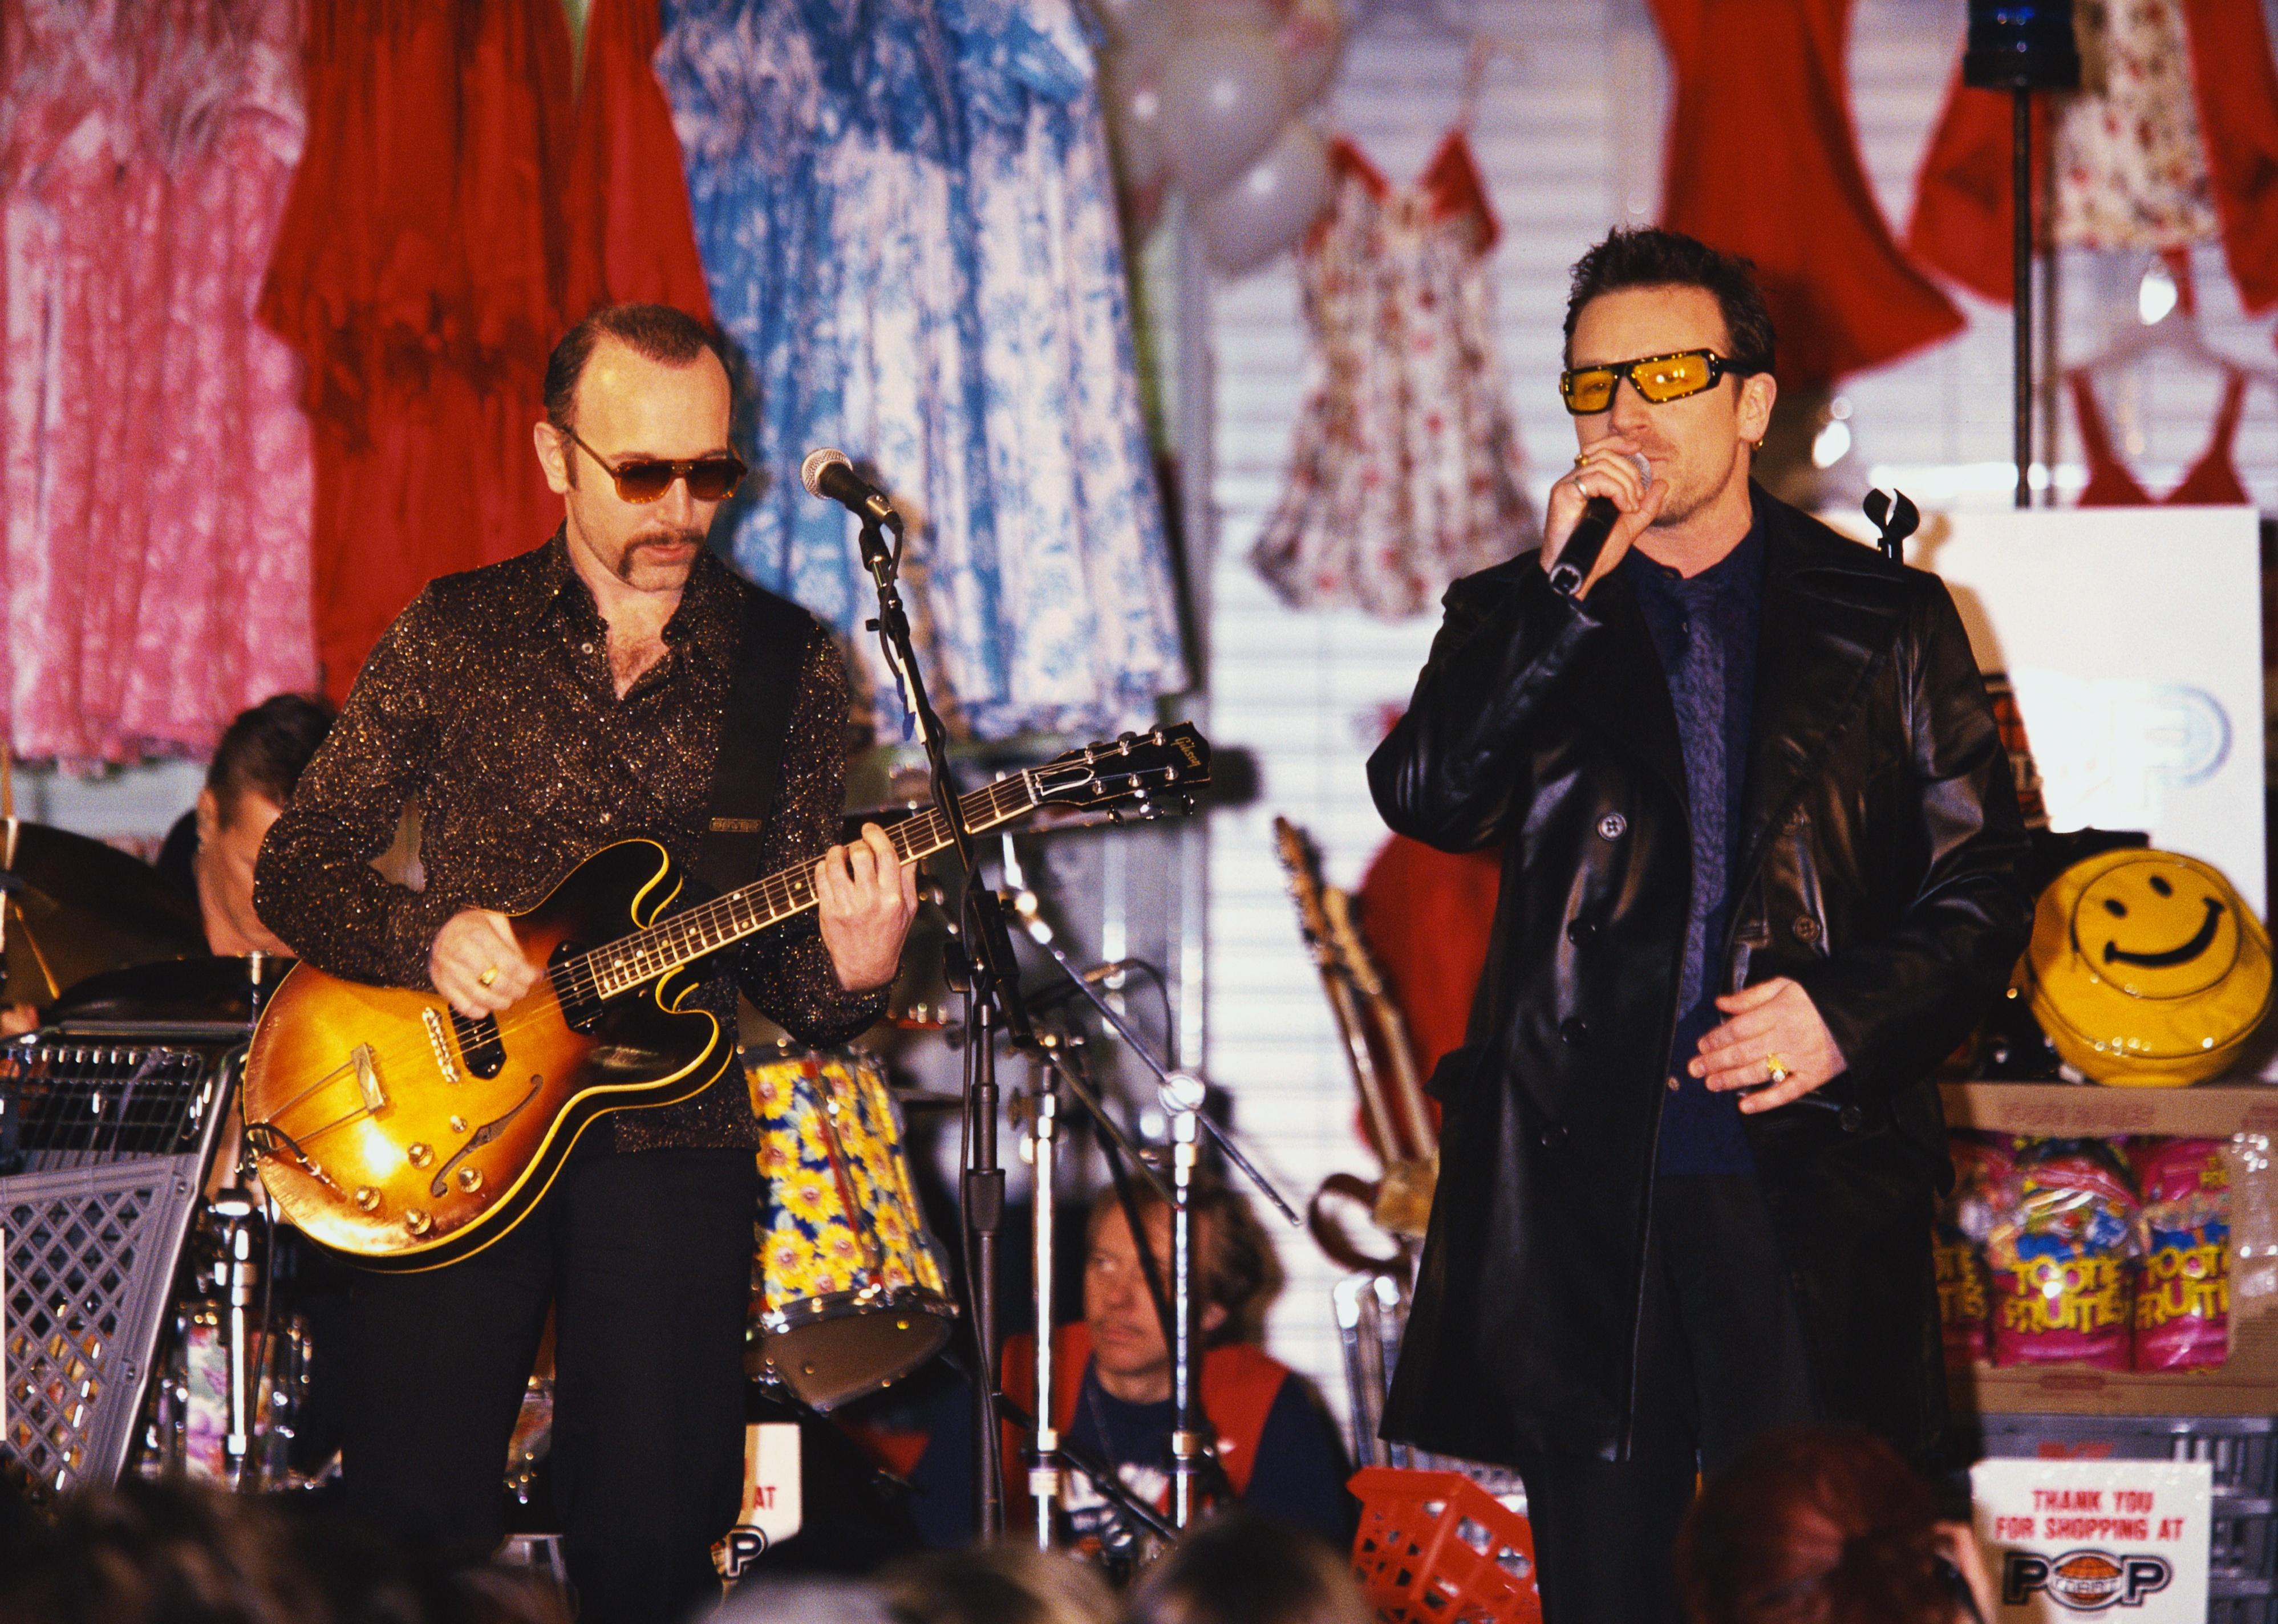 The Edge and Bono of U2 performing on stage.